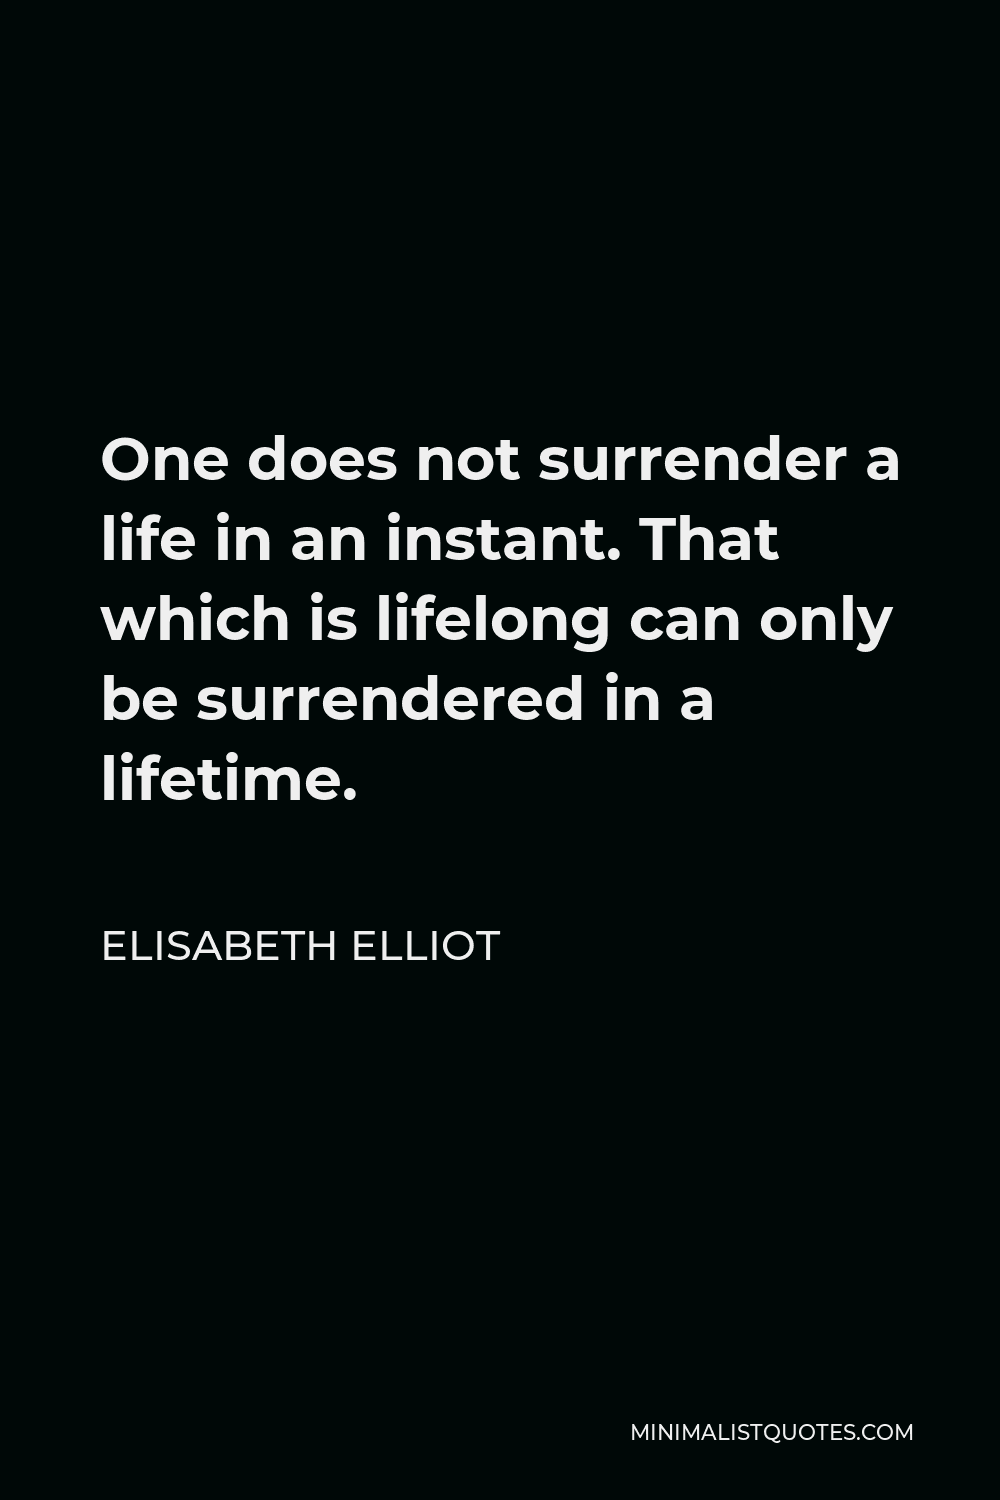 Elisabeth Elliot Quote - One does not surrender a life in an instant. That which is lifelong can only be surrendered in a lifetime.